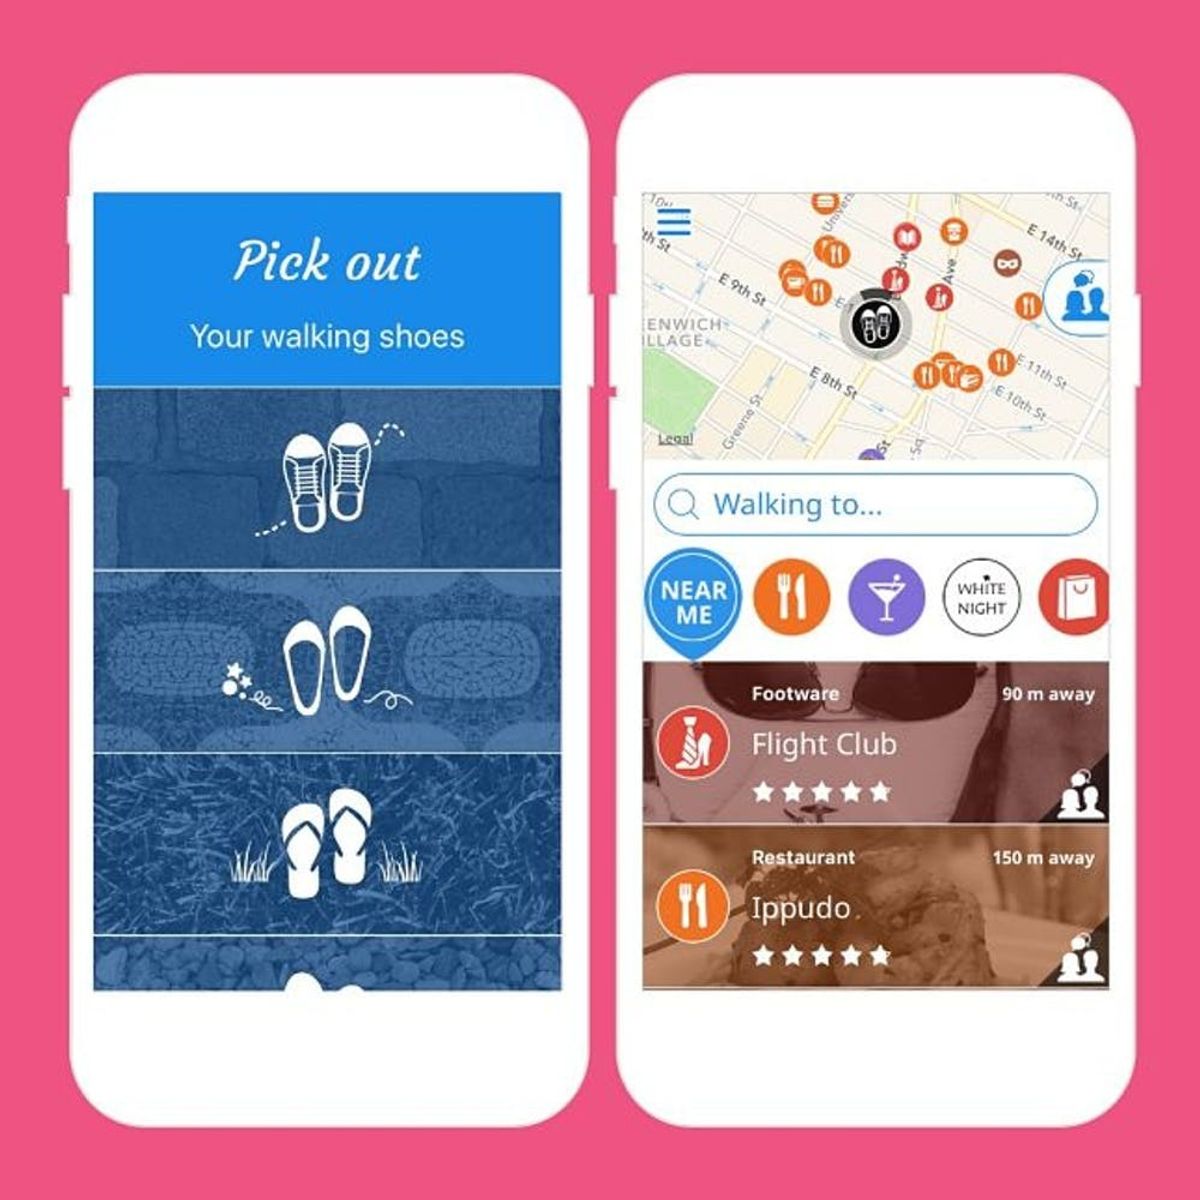 12 Travel Map Apps That Beat Google Maps Whether or Not You Have WiFi